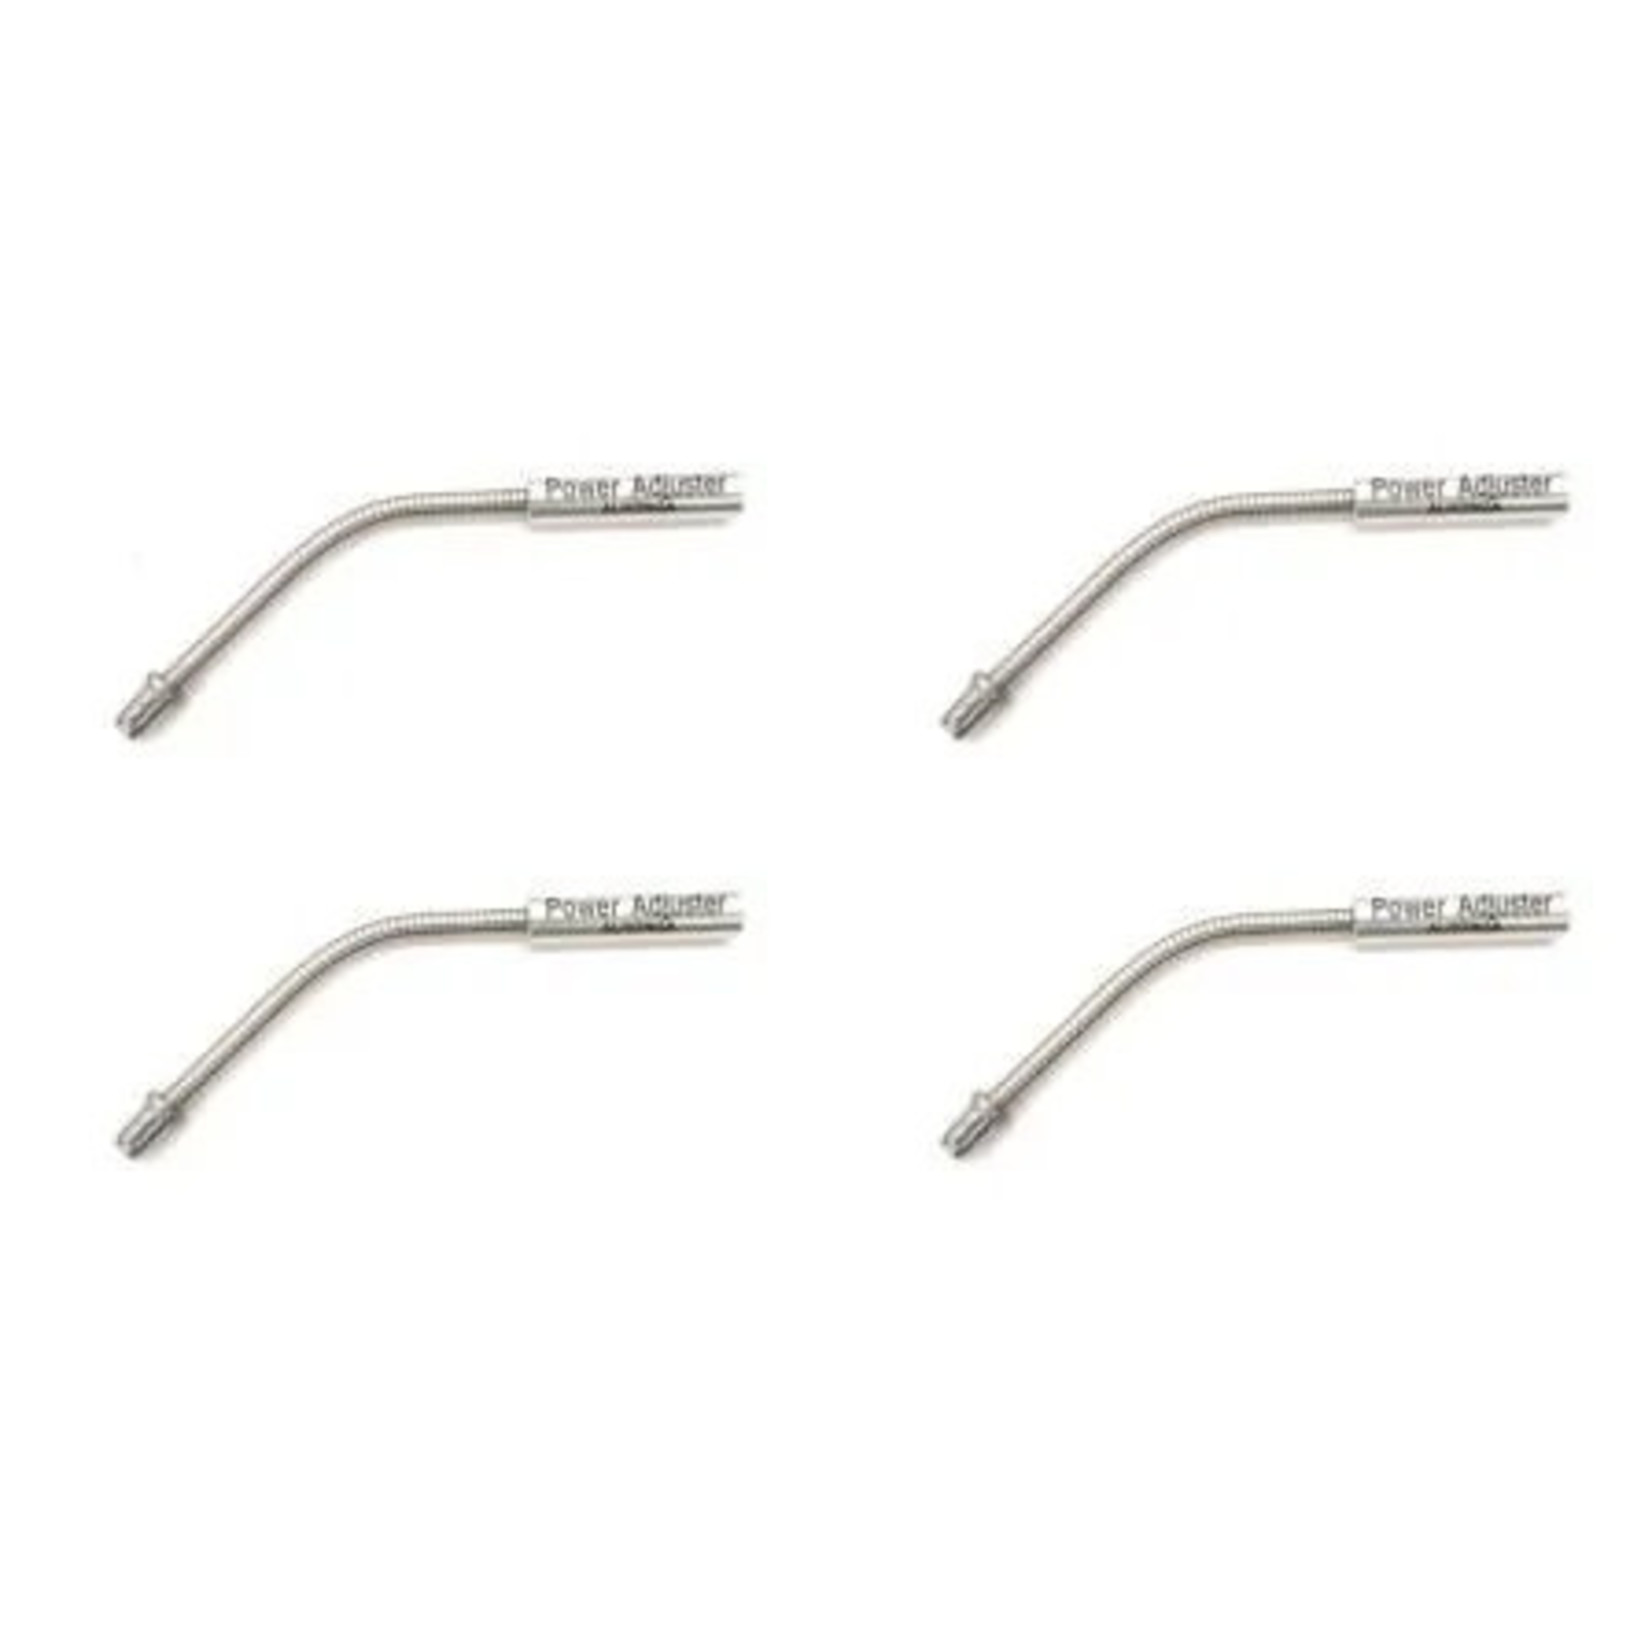 Incomex Trading Pty Ltd BPW Bicycle Cable Guide - Flexible Angle Noodle For V Brake - Silver(Bag of 4)